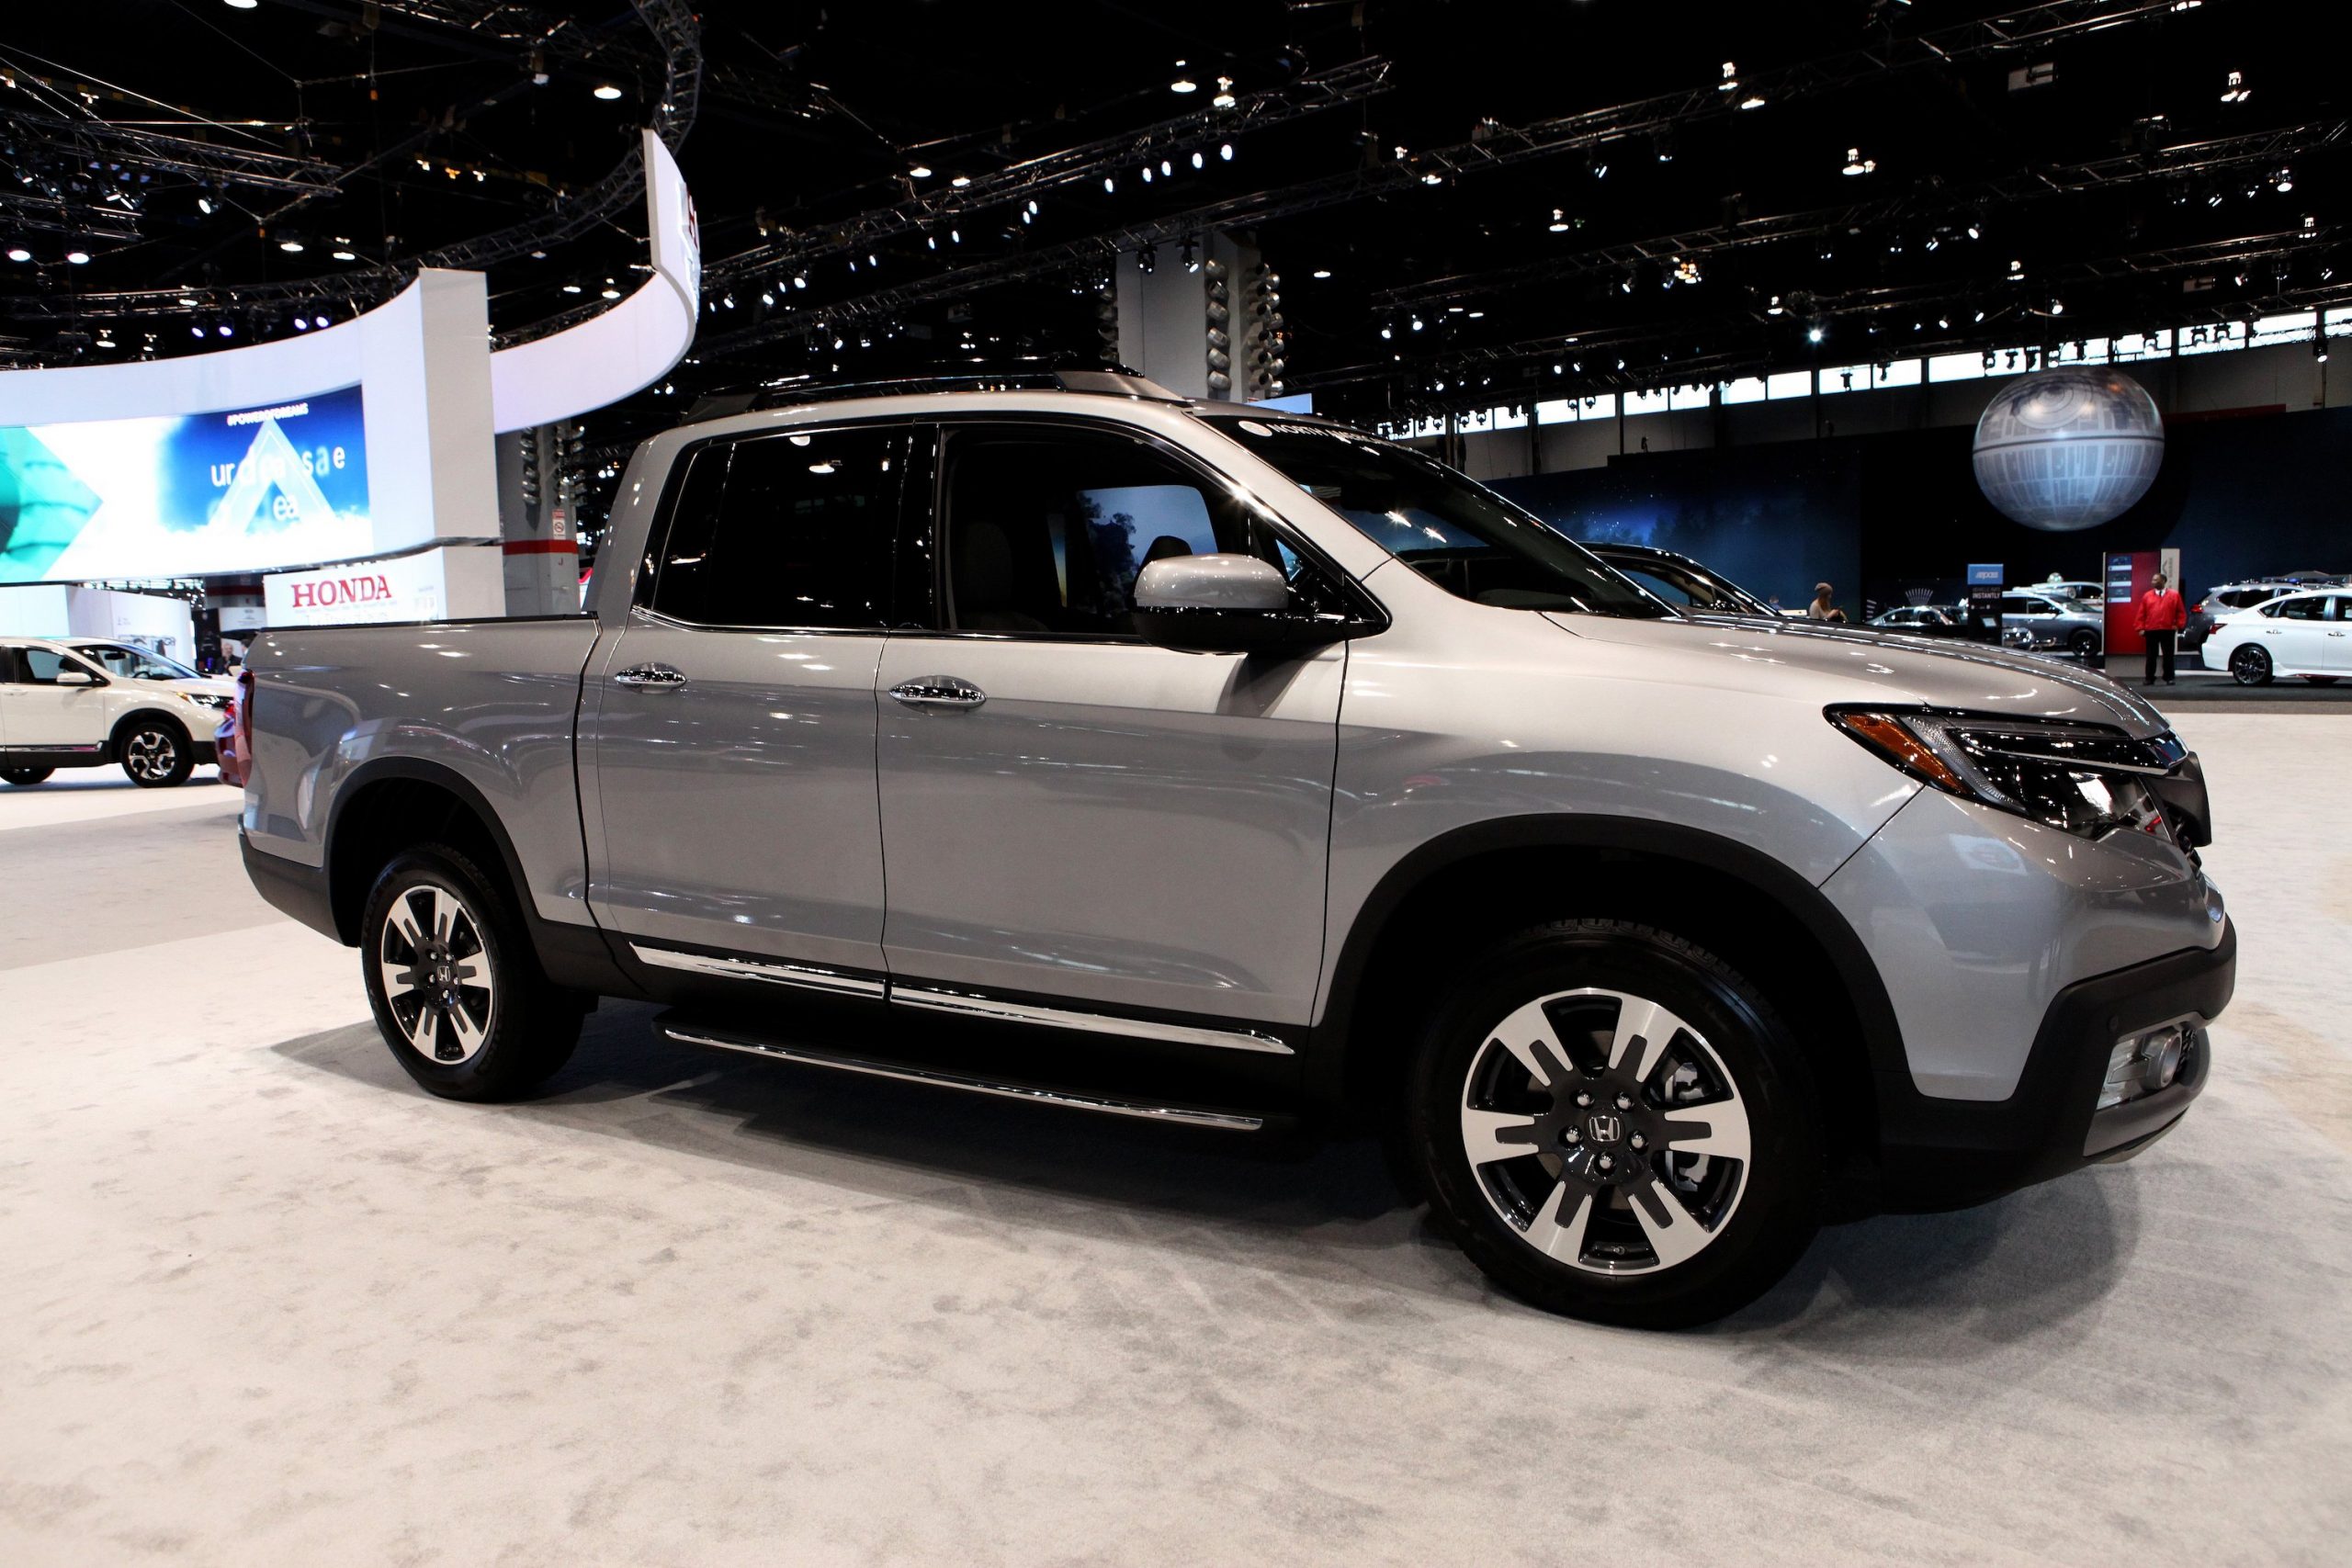 Silver 2017 Honda Ridgeline is on display at the 109th Annual Chicago Auto Show at McCormick Place